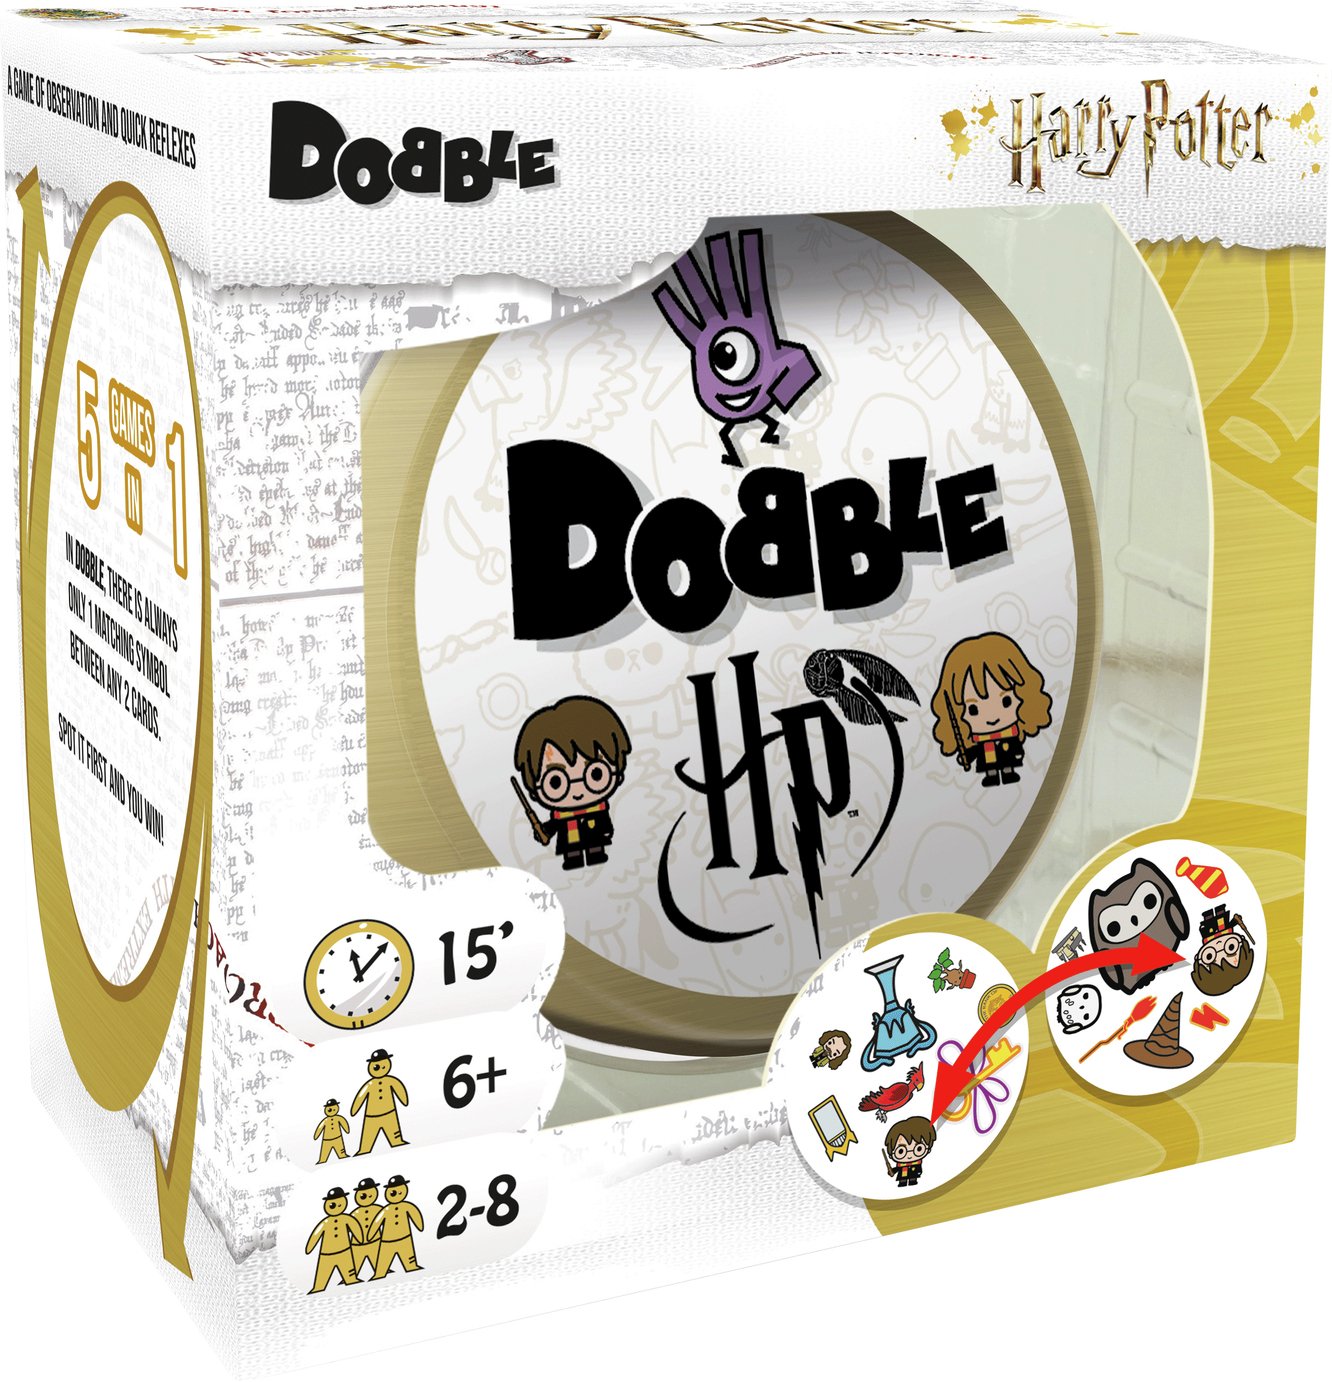 Harry Potter Dobble Game review